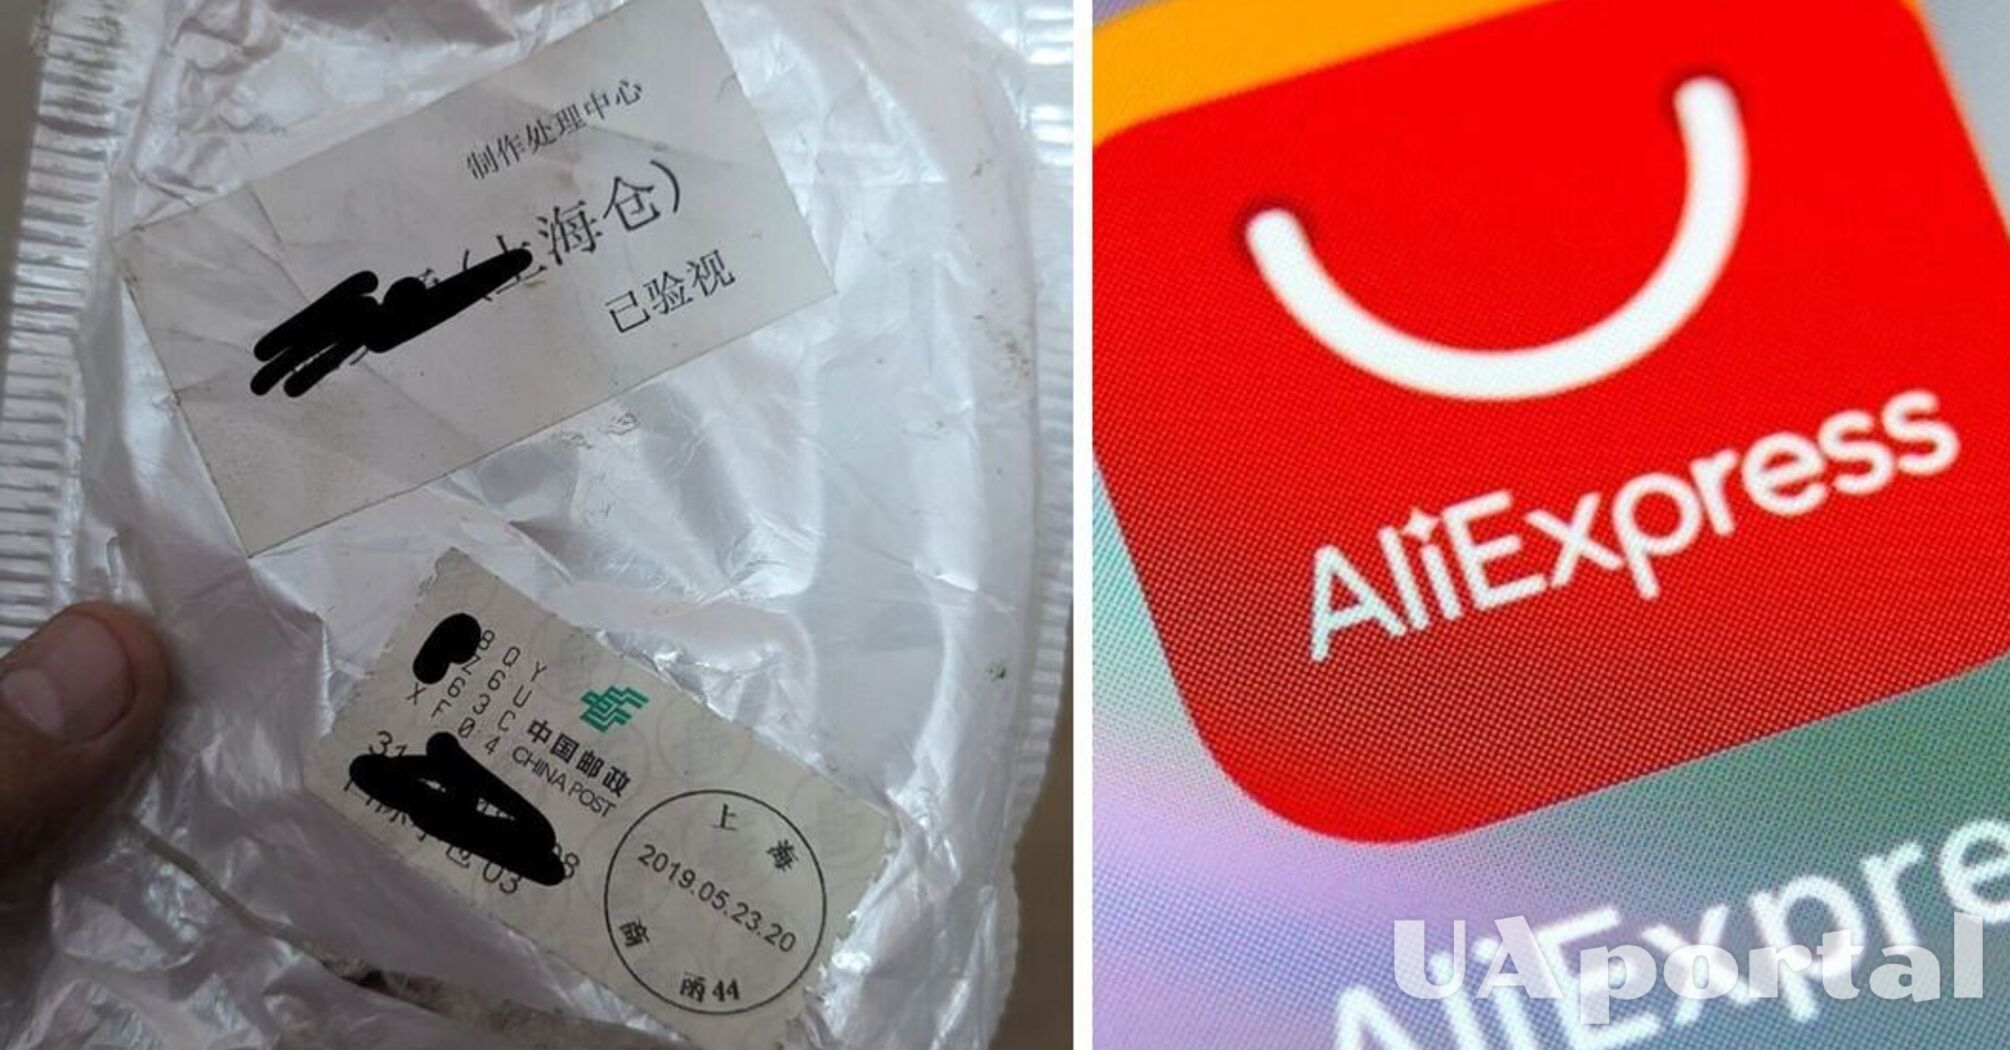 An Indian resident received an order from AliExpress after four years